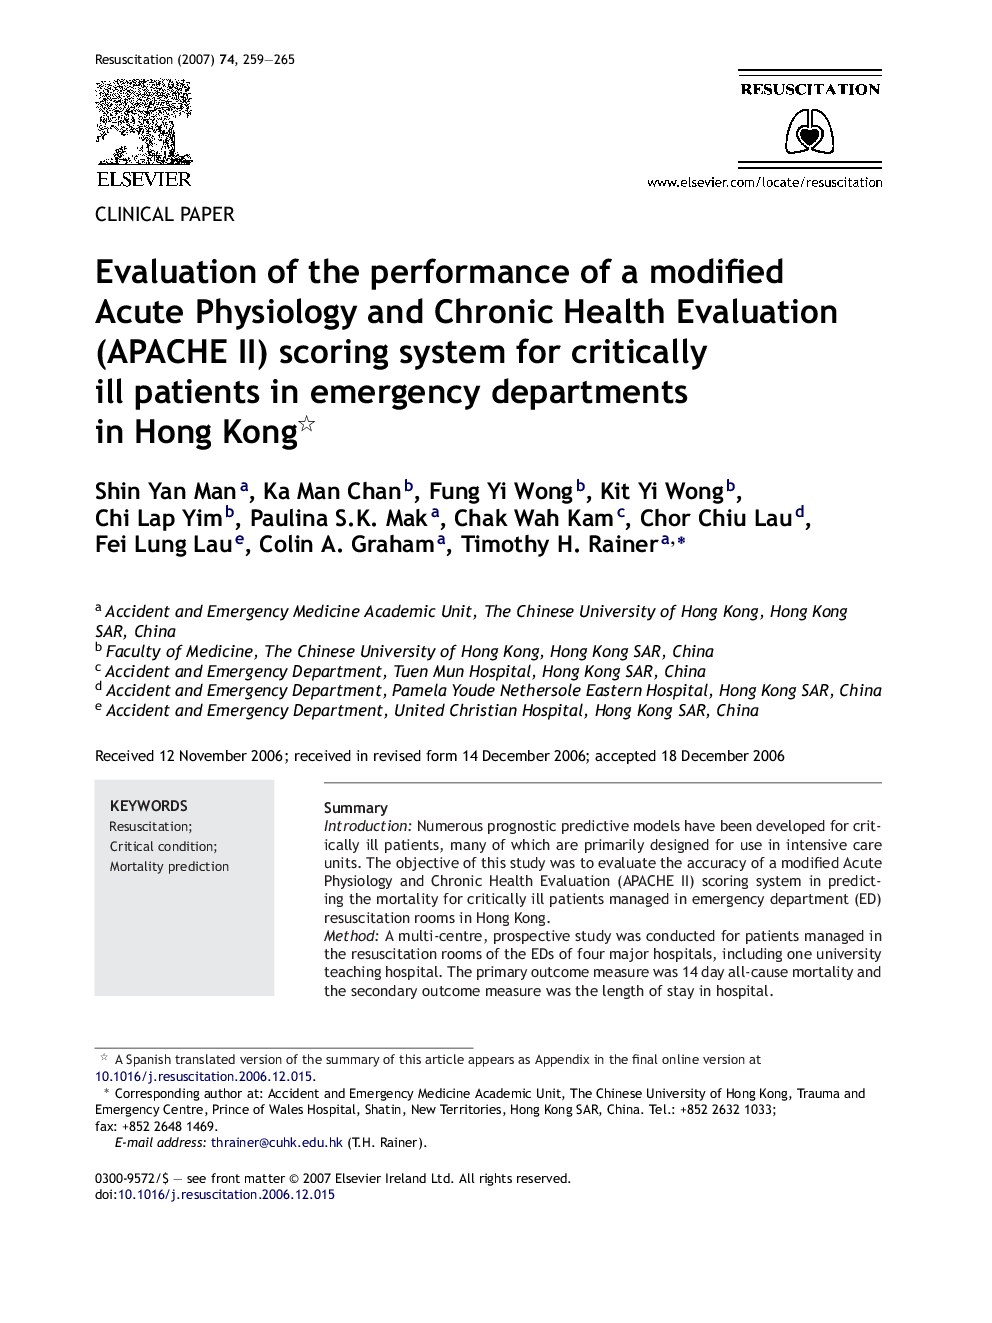 Evaluation of the performance of a modified Acute Physiology and Chronic Health Evaluation (APACHE II) scoring system for critically ill patients in emergency departments in Hong Kong